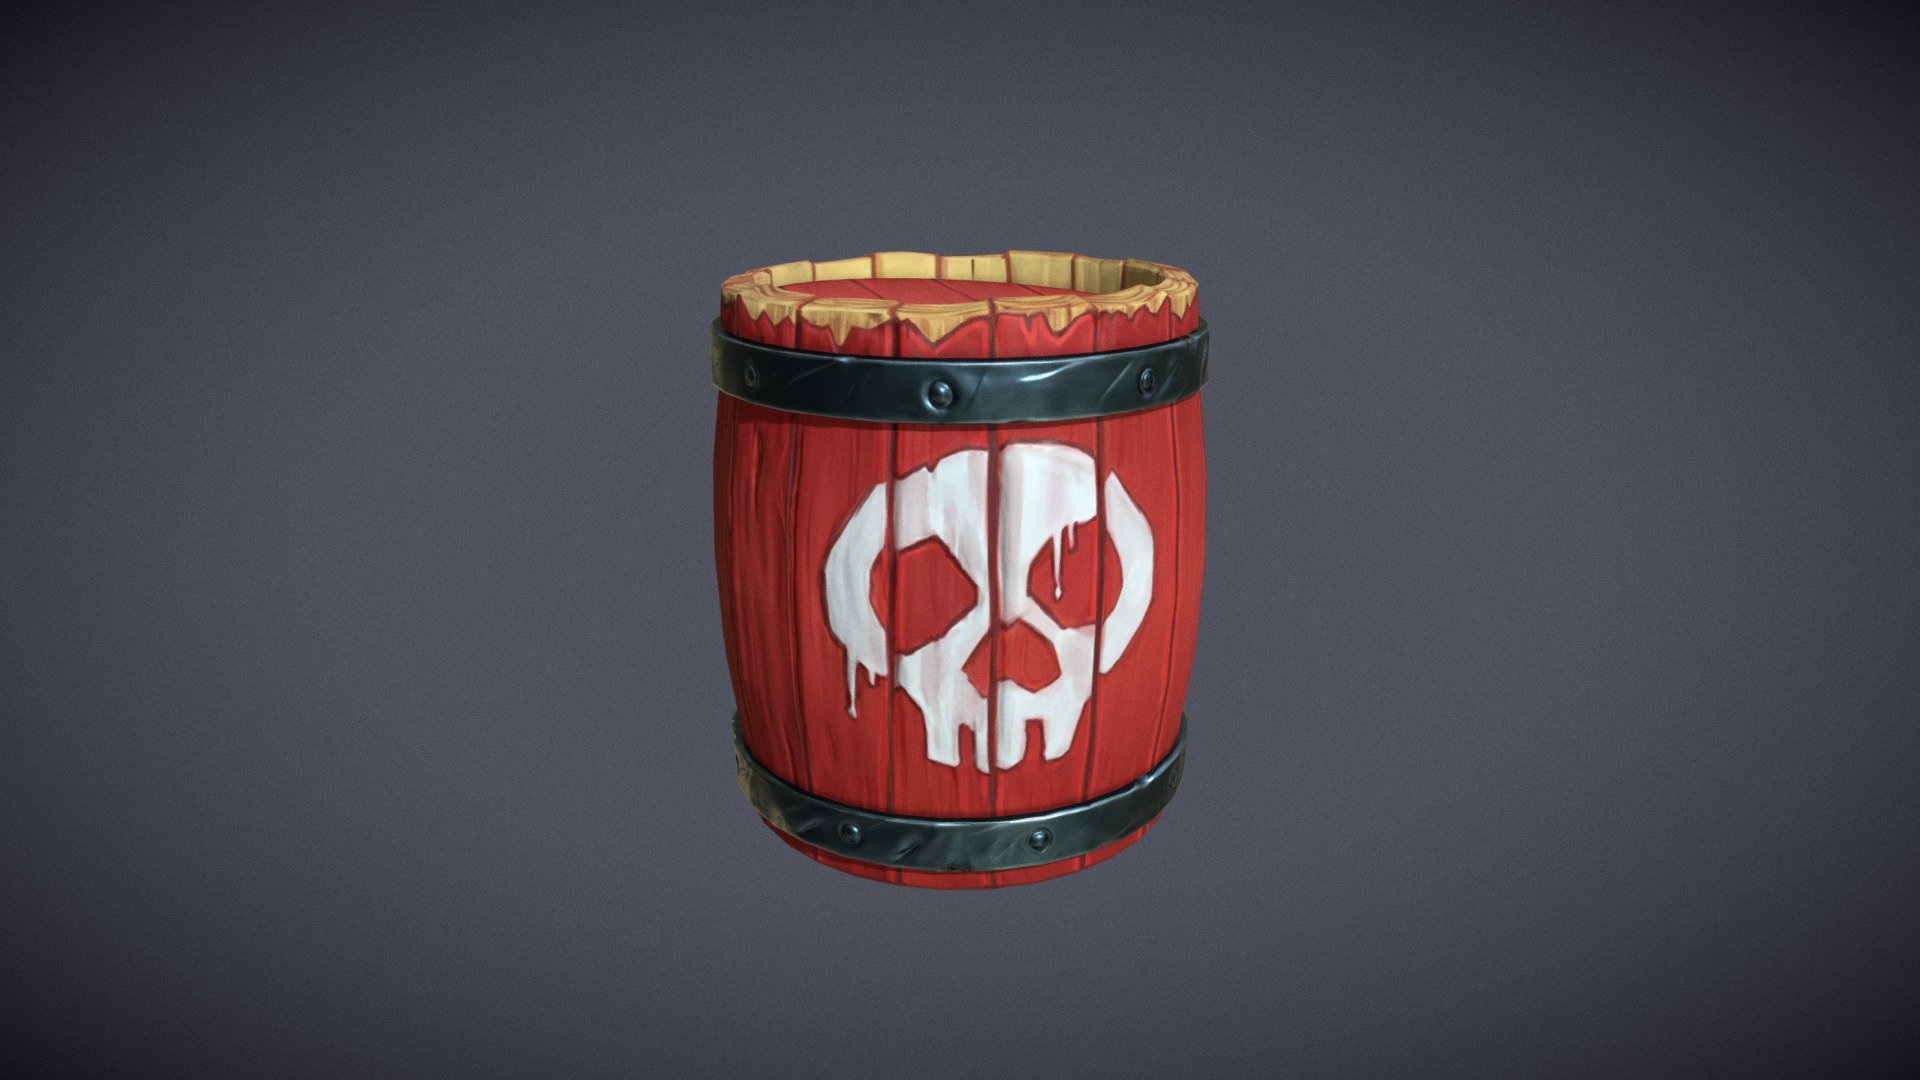 Stylized, hand painted 3d model of explosive barrel, inspired by Sea of Thieves. 
Made 100% in blender 3d model